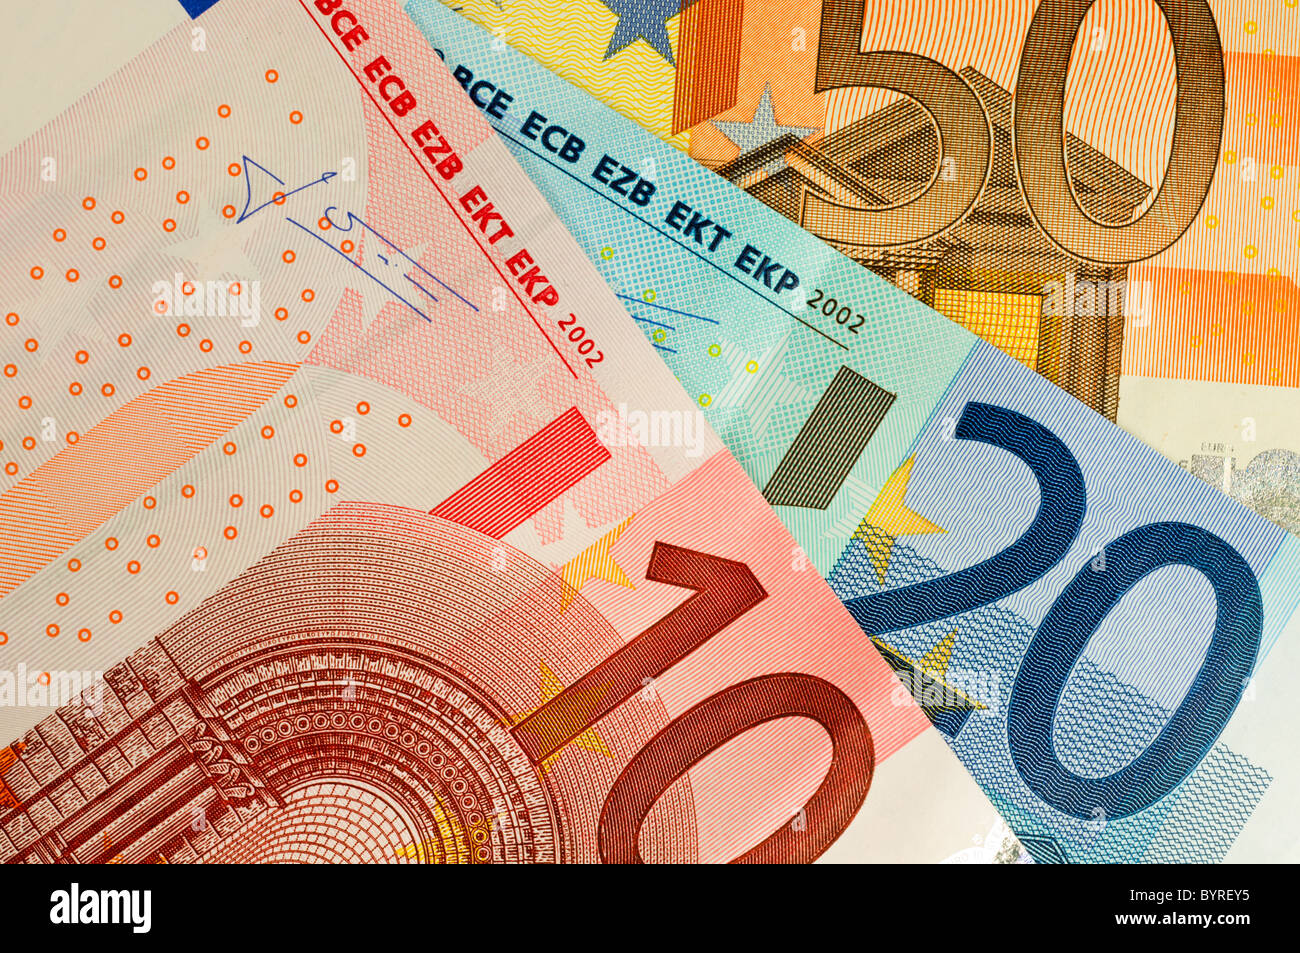 european currency Stock Photo